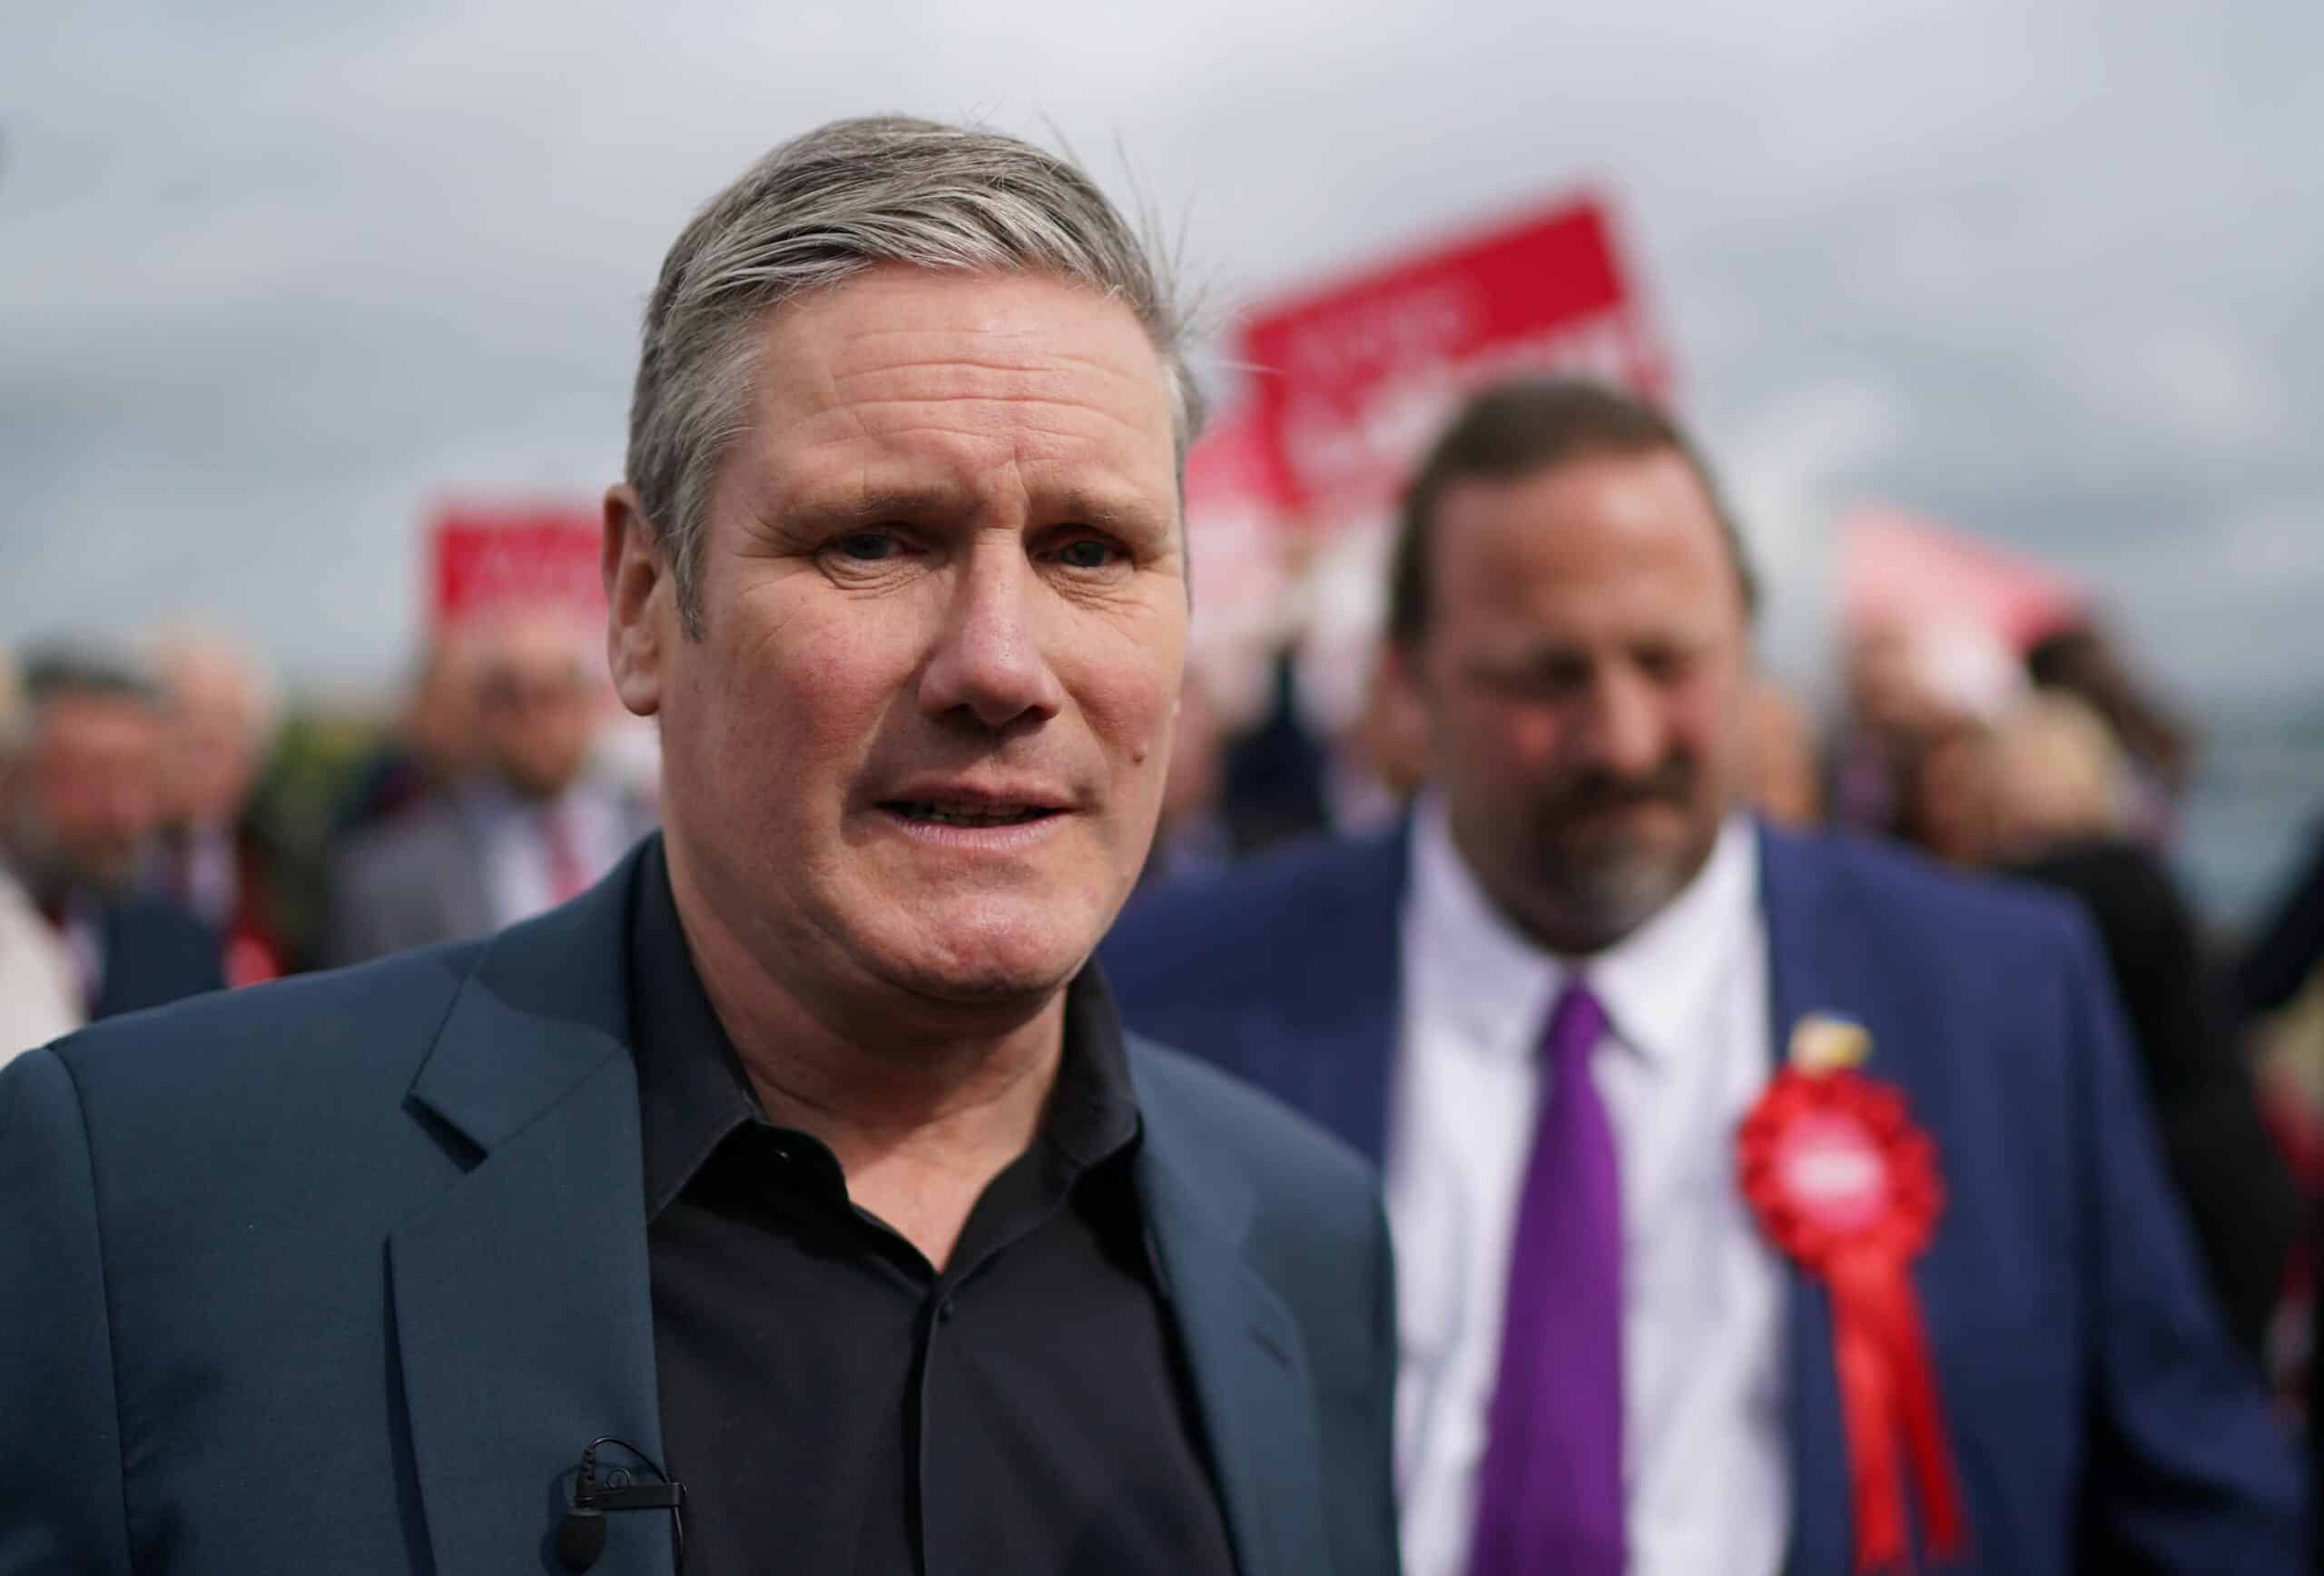 Starmer refuses SEVEN TIMES to rule out coalition with Lib Dems